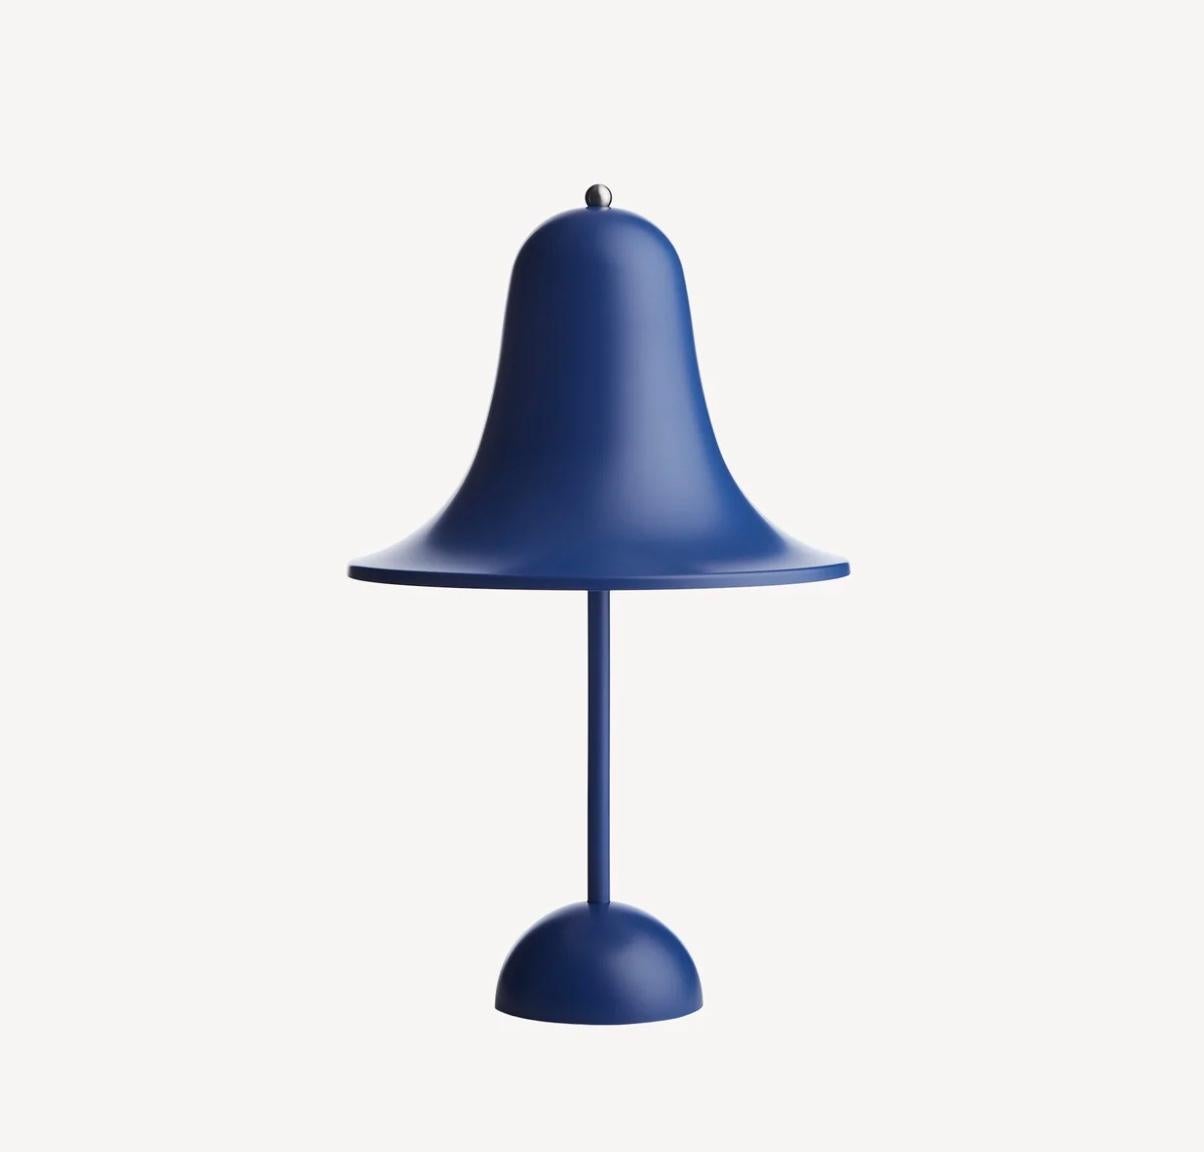 Verner Panton 'Pantop Portable' table lamp in 'Matt Classic Blue' for Verpan. Designed in 1980. New, current production.

This is a versatile smaller and wireless version of the 'Pantop' table lamp, usb-chargeable. 

The elegant Pantop line was